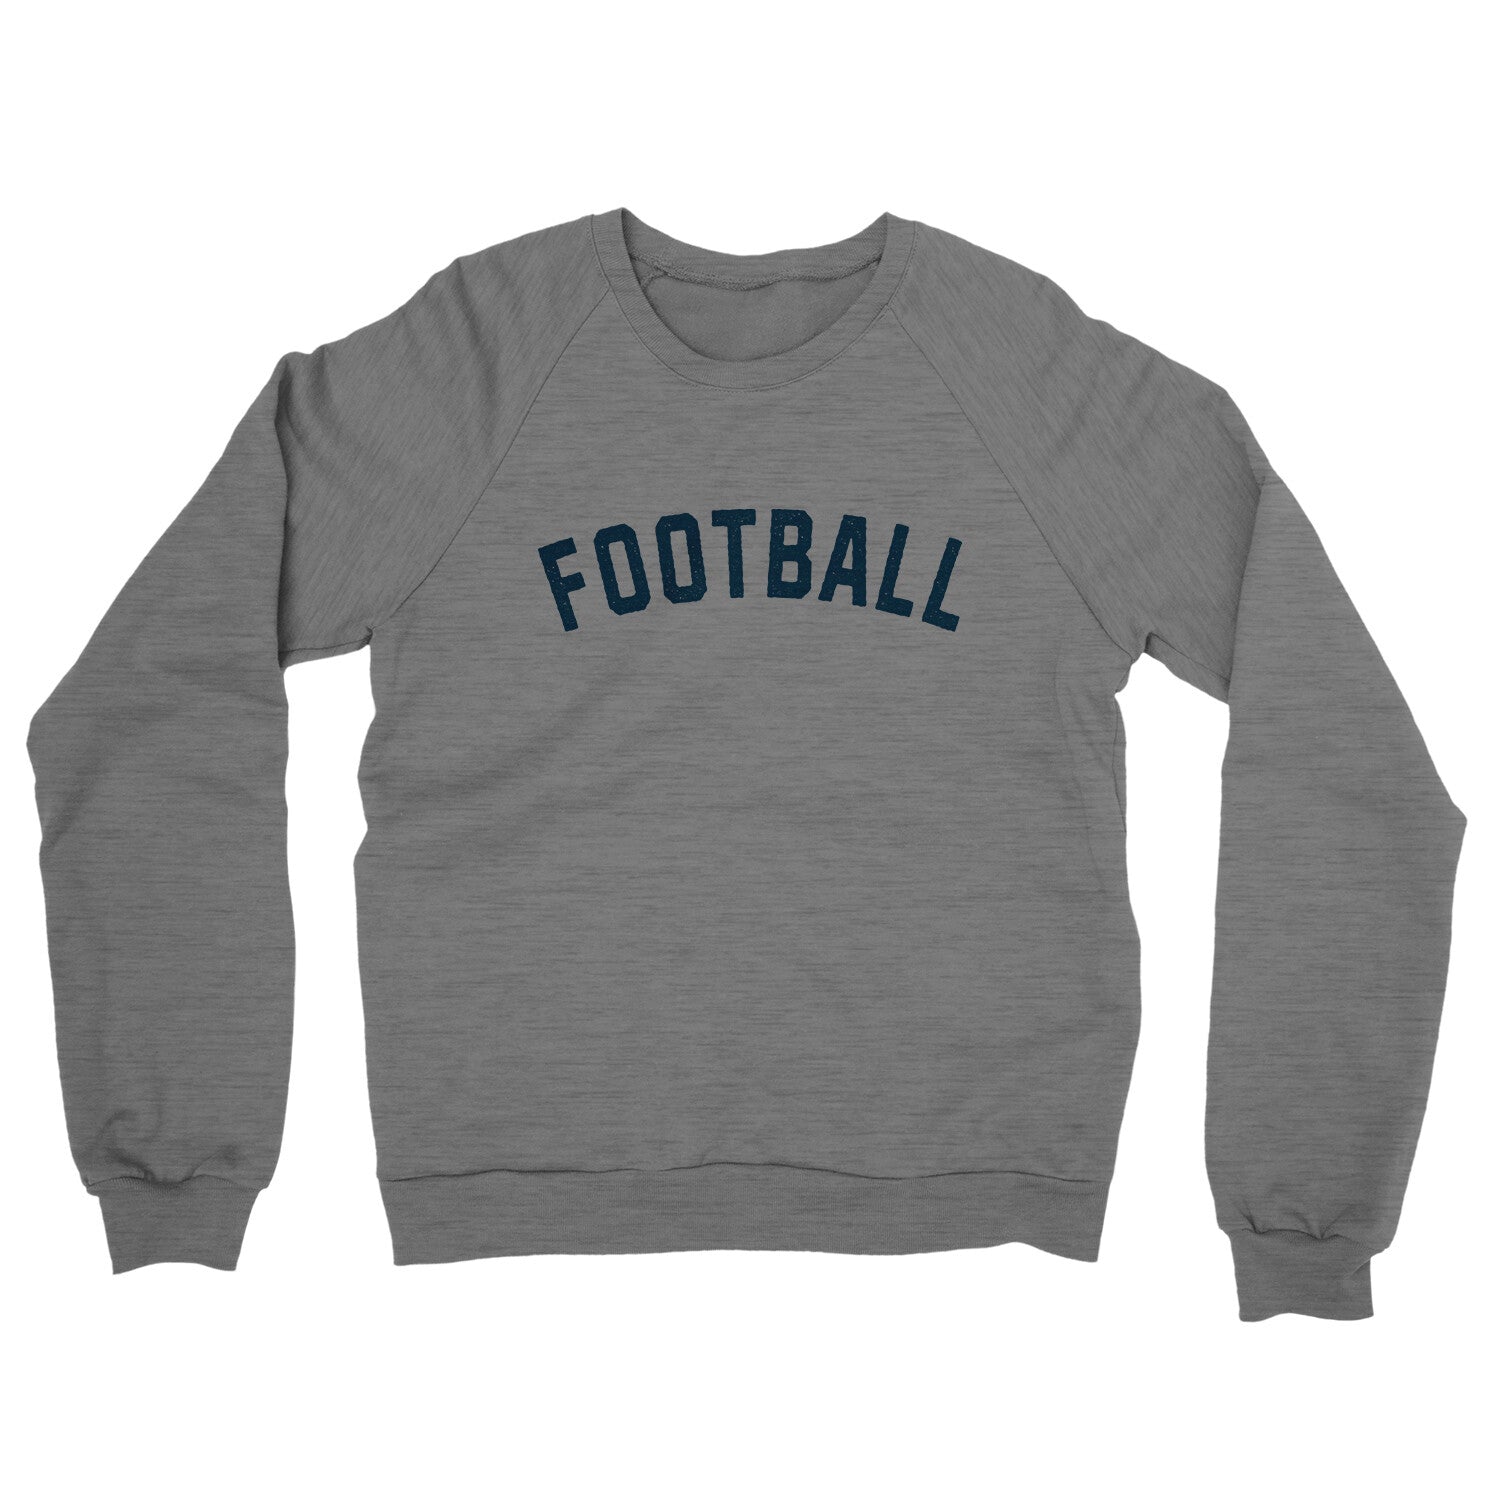 Football in Graphite Heather Color